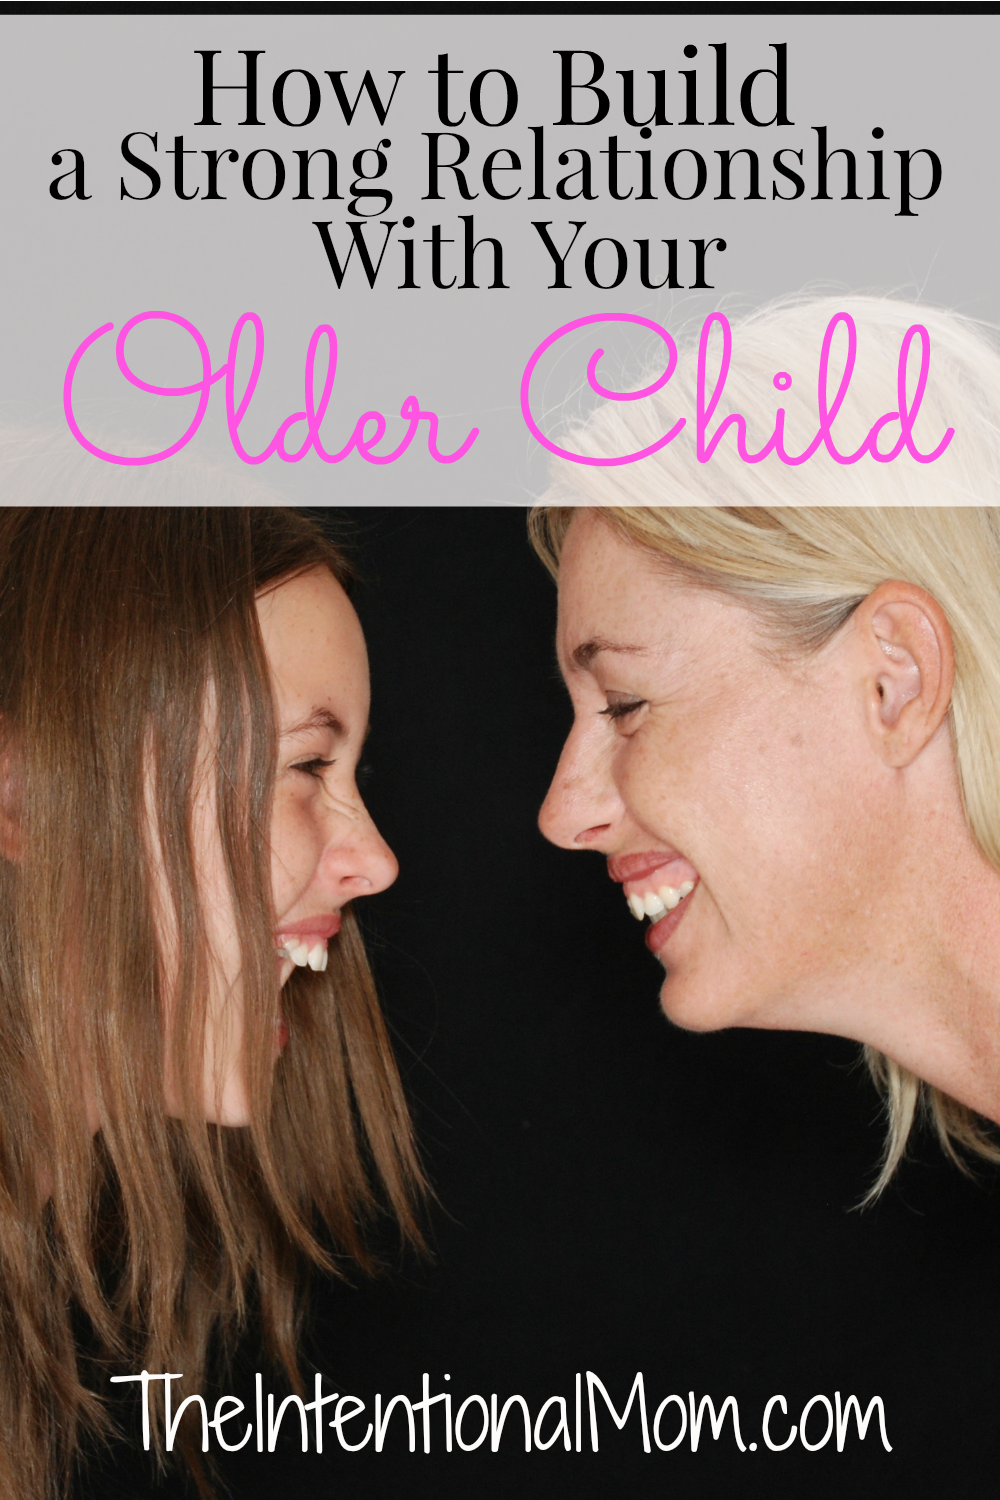 How to Build a Strong Relationship With Your Older Child